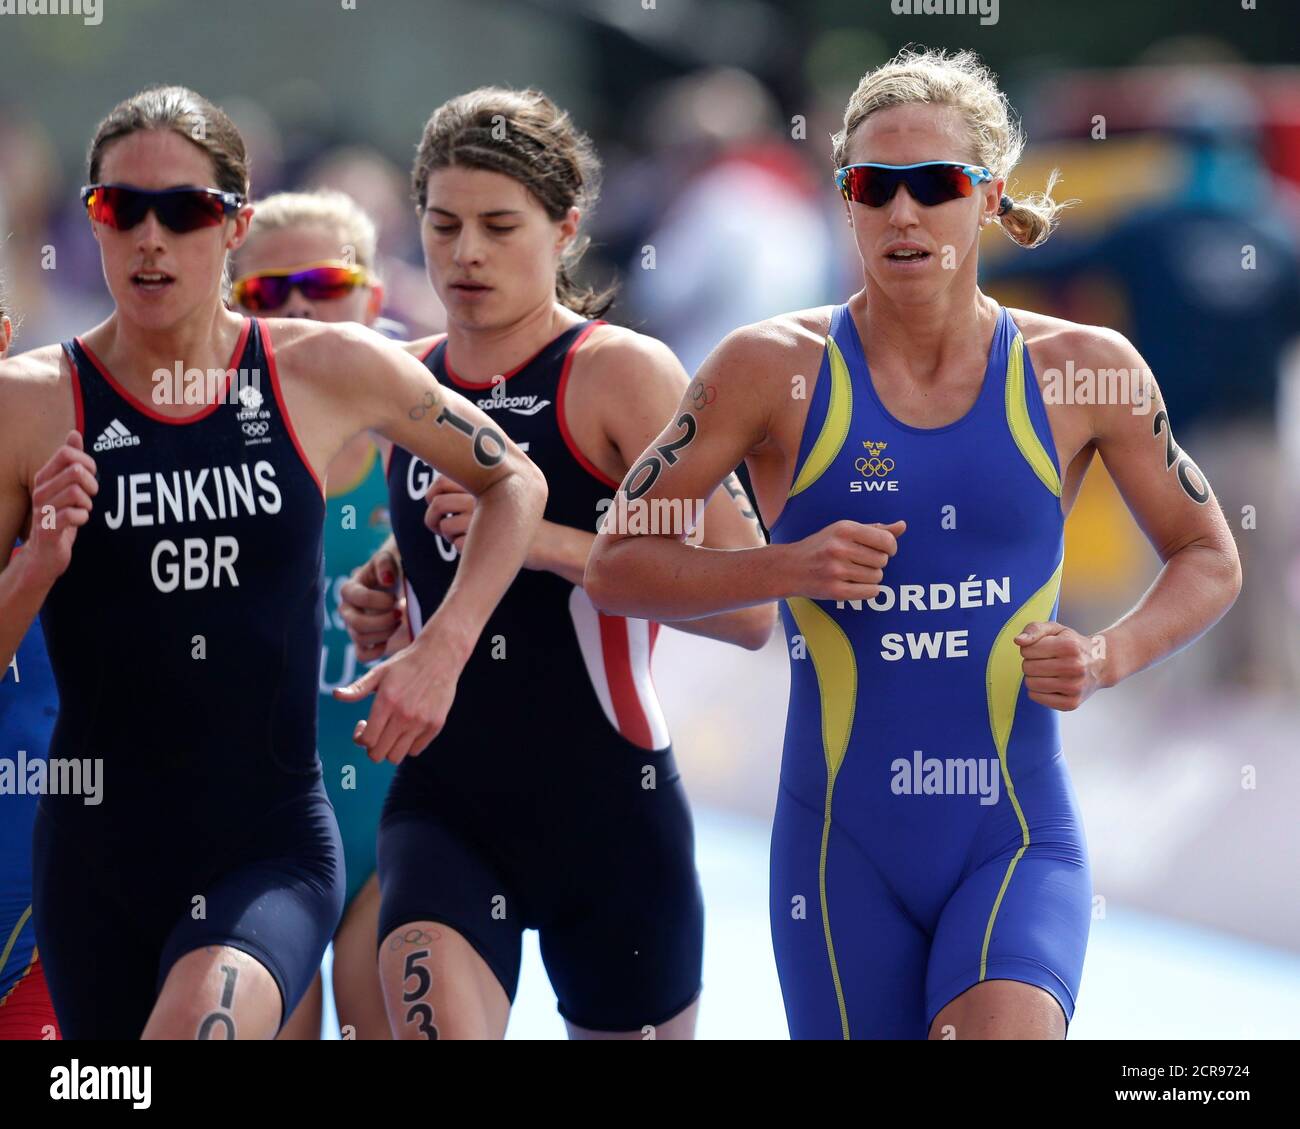 germen fuego Lectura cuidadosa Lisa Norden (R) of Sweden competes in the women's triathlon final during  the London 2012 Olympic Games at Hyde Park August 4, 2012. REUTERS/Tim  Wimborne (BRITAIN - Tags: SPORT TRIATHLON SPORT OLYMPICS